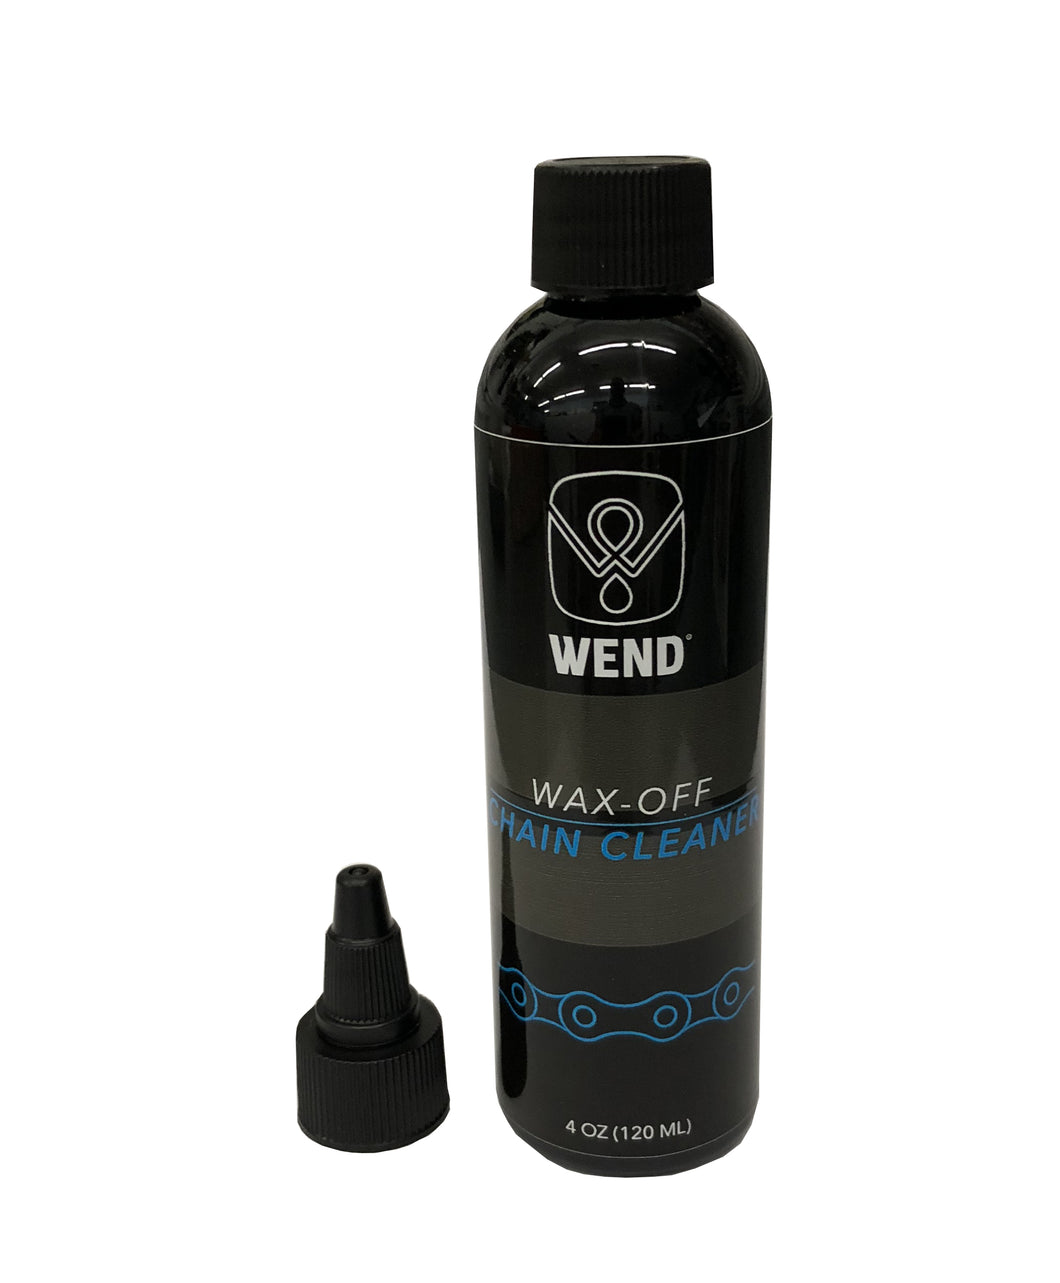 WEND MF WAX-OFF CHAIN CLEANER